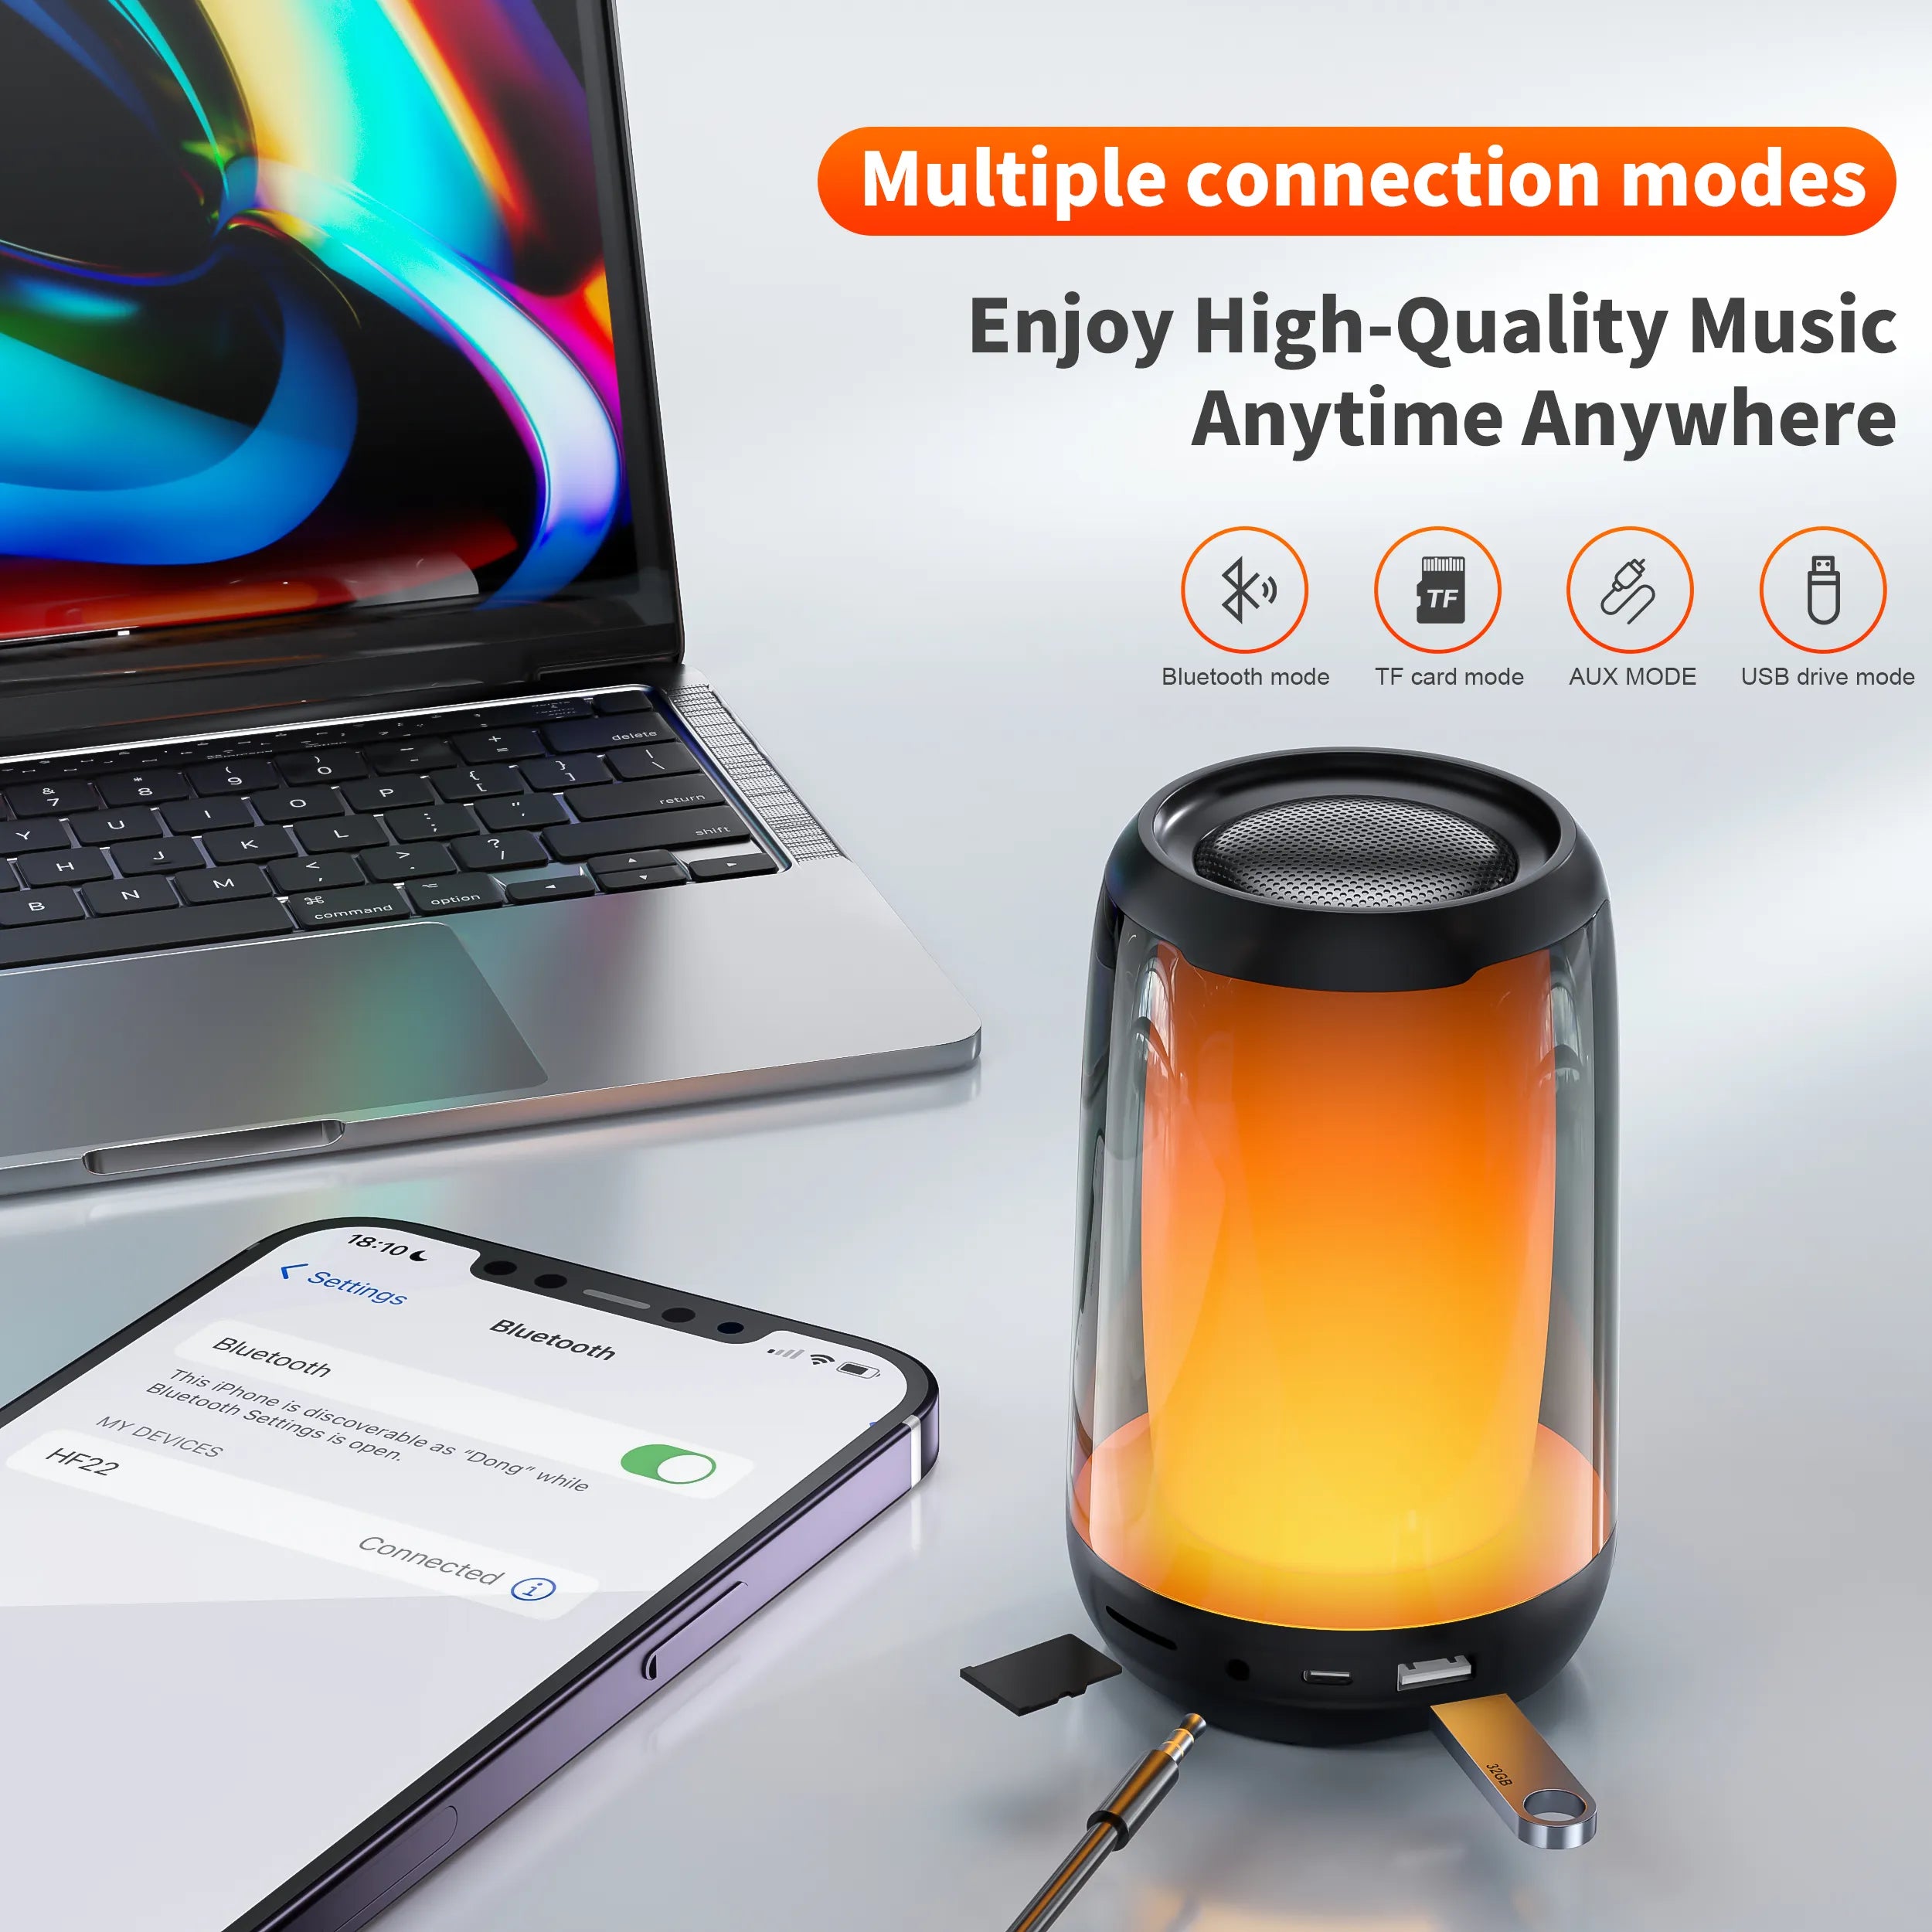 QERE Bluetooth Speaker with Hi-Res 5W Audio,Wireless HiFi Portable Speaker IPX5 Waterproof,Outdoor Multiple connection modes,